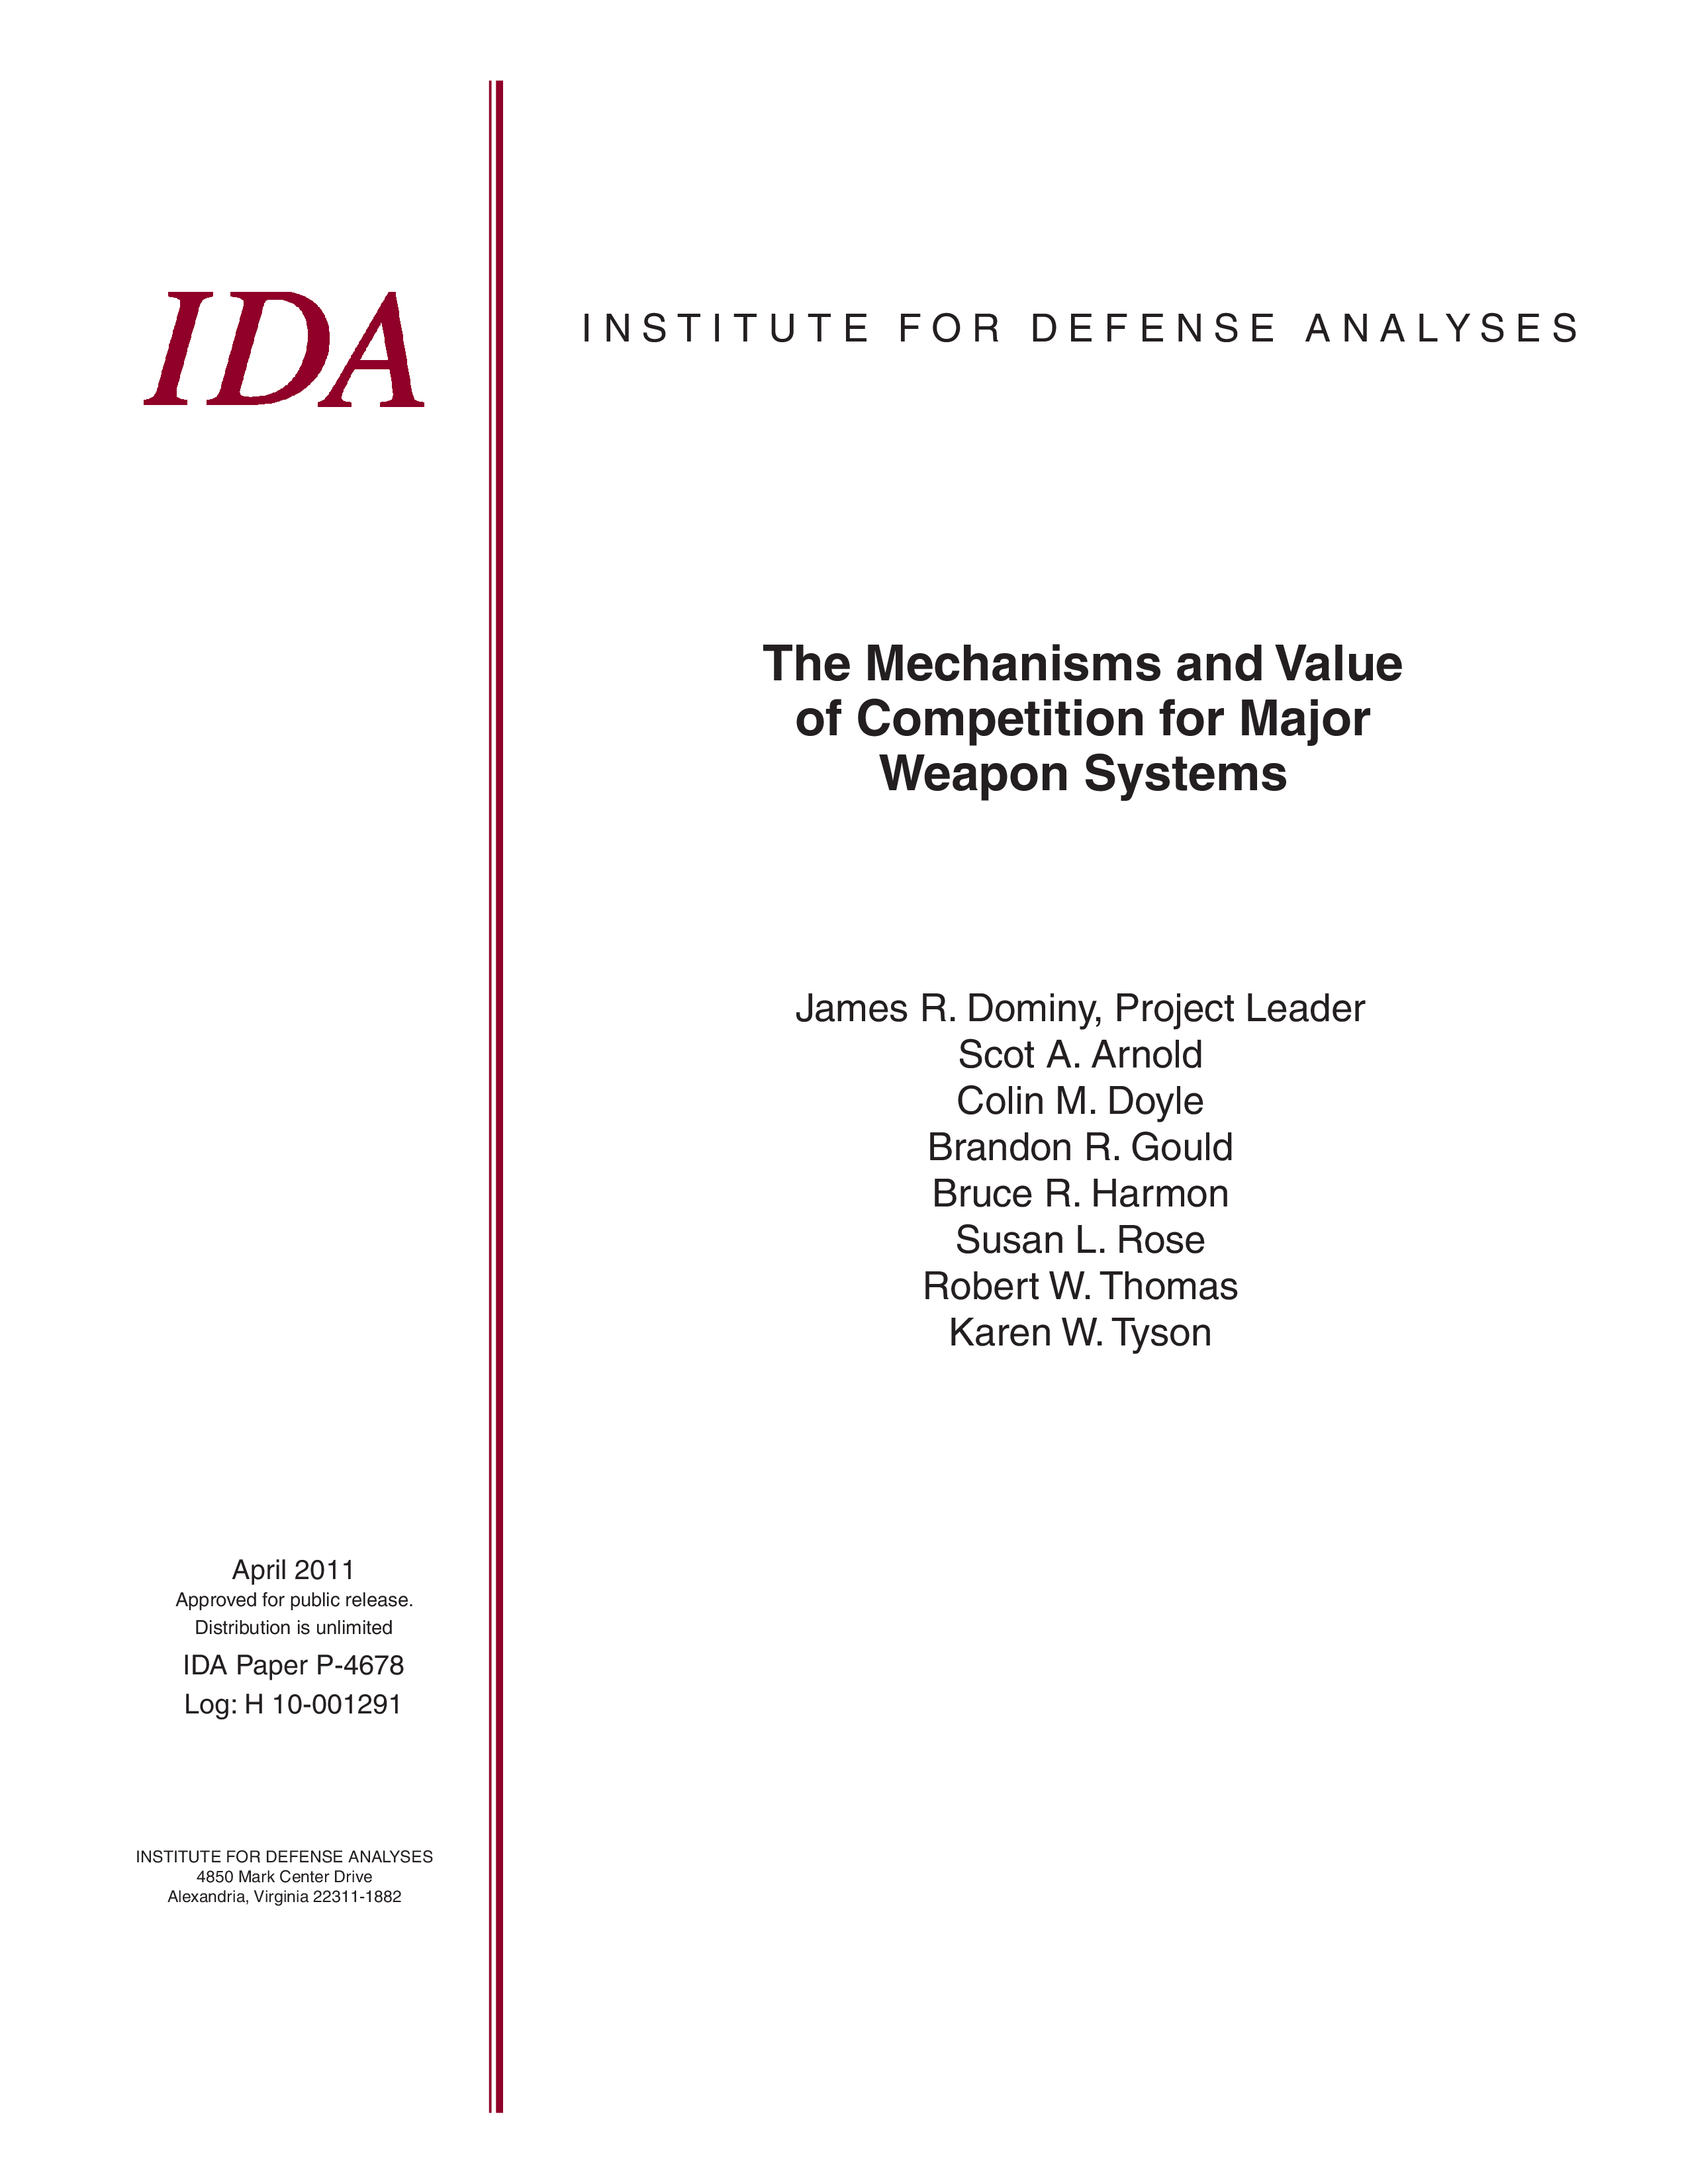 The Mechanics and Value of Competition for Major Weapon Systems 